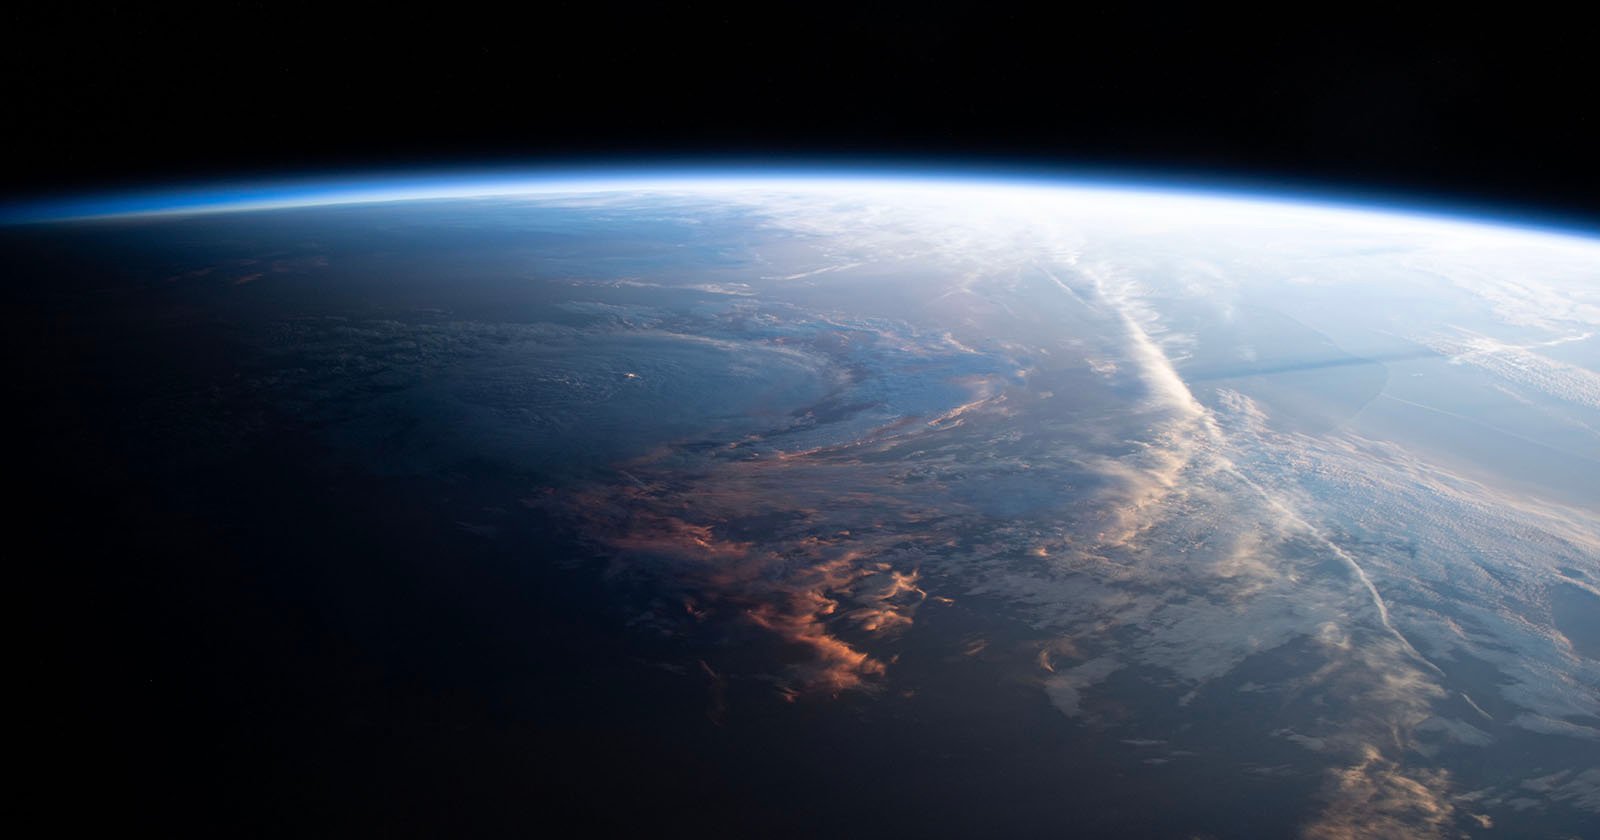 An Earth astronaut shares amazing photos he took while in orbit